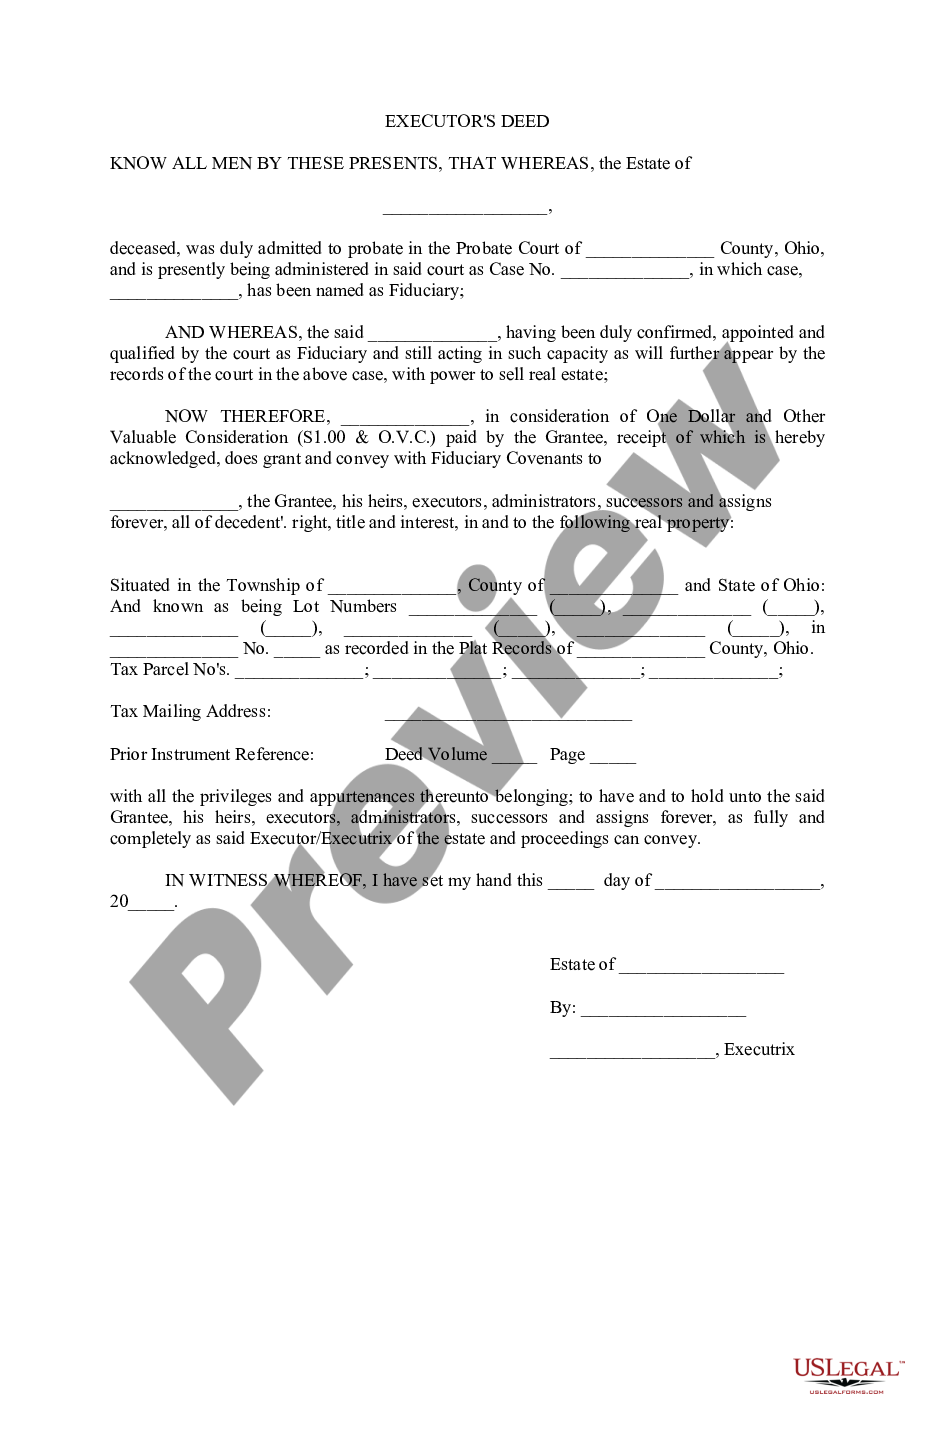 ohio-executor-s-deed-us-legal-forms